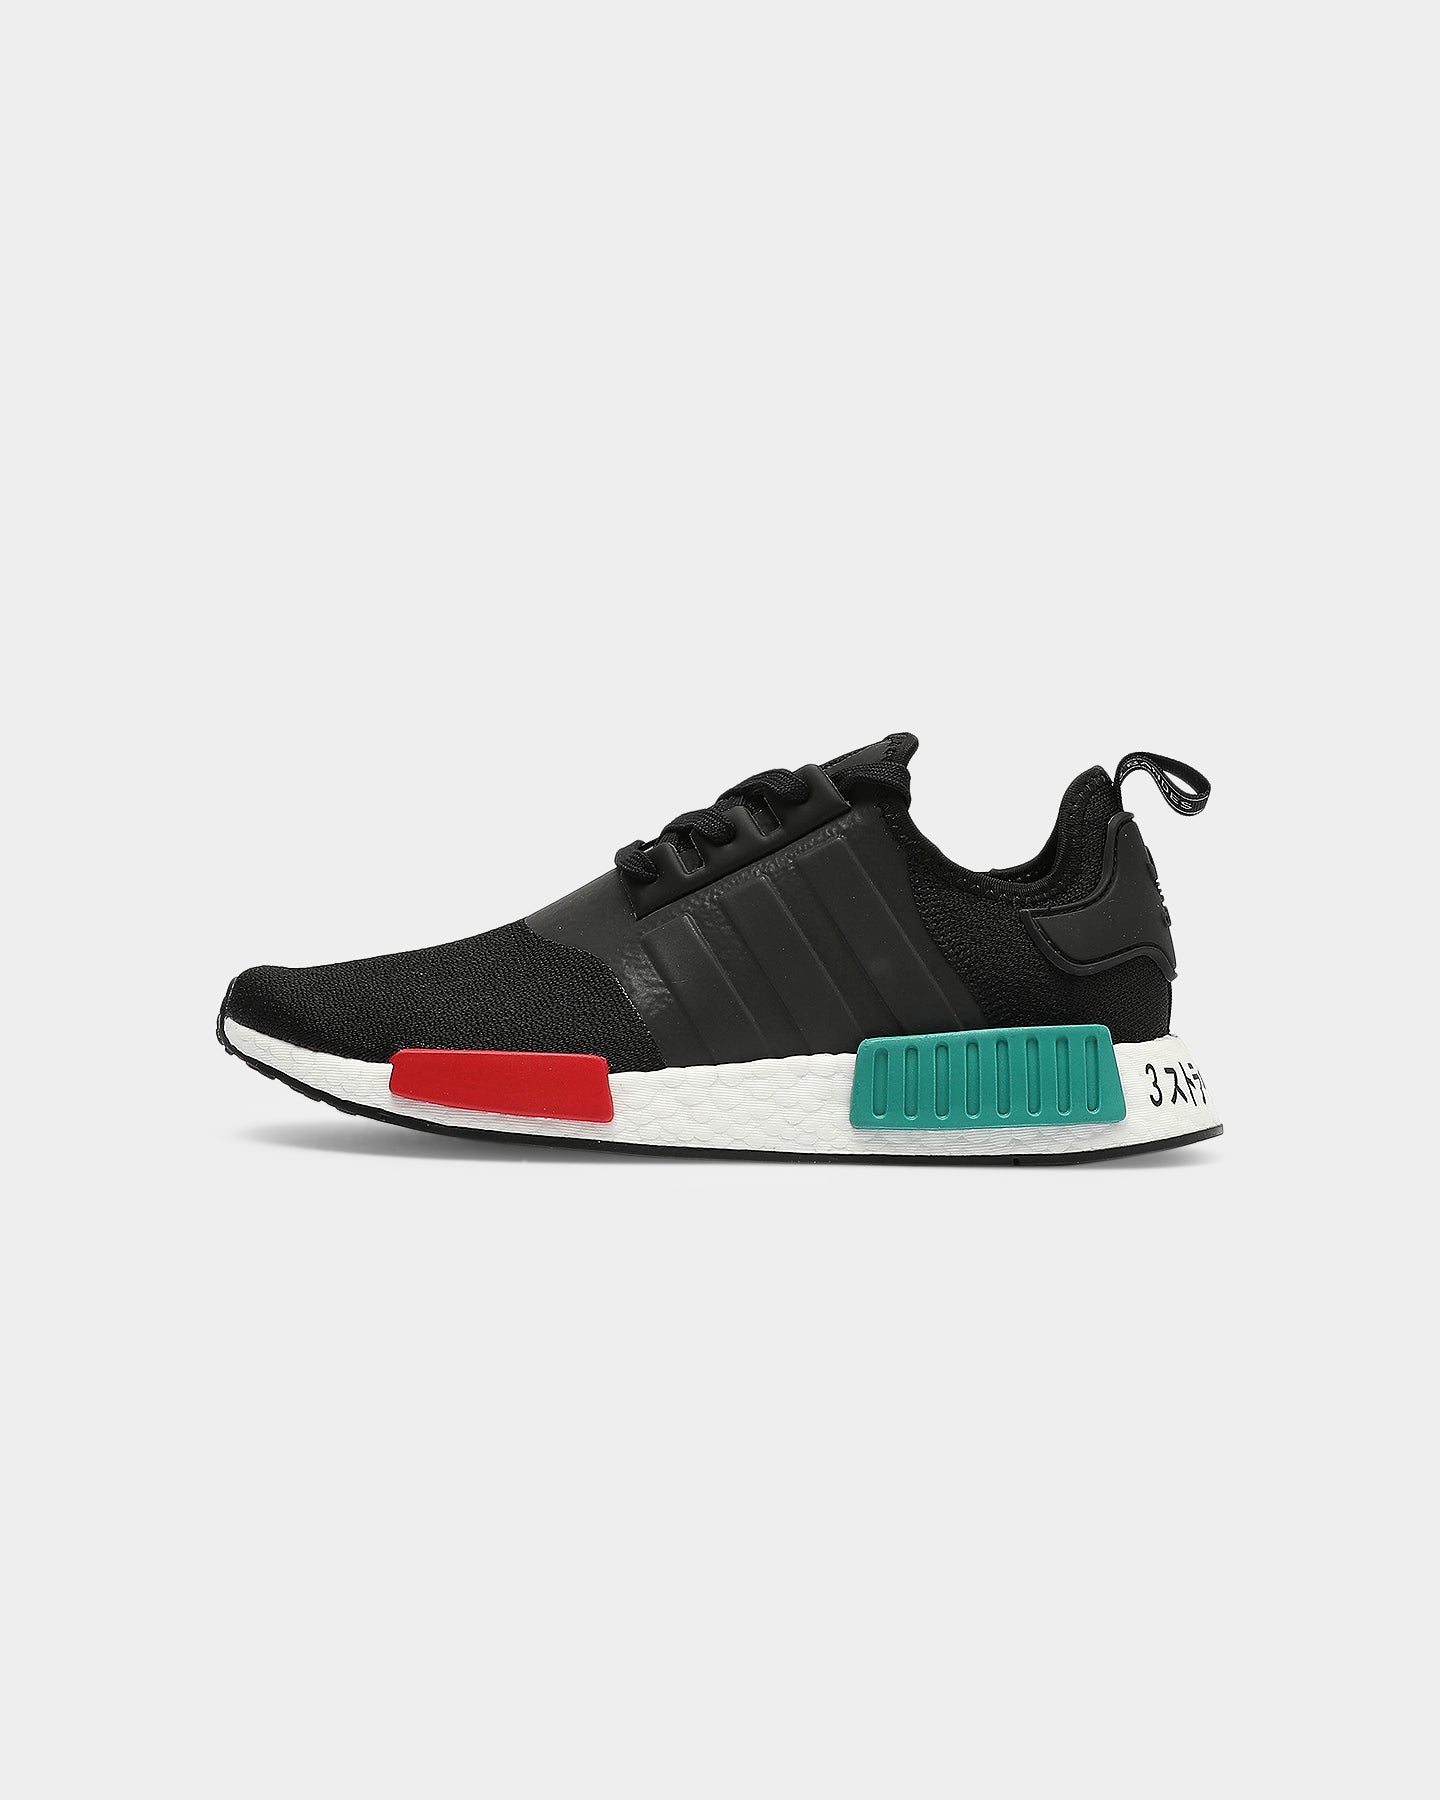 red and black nmds